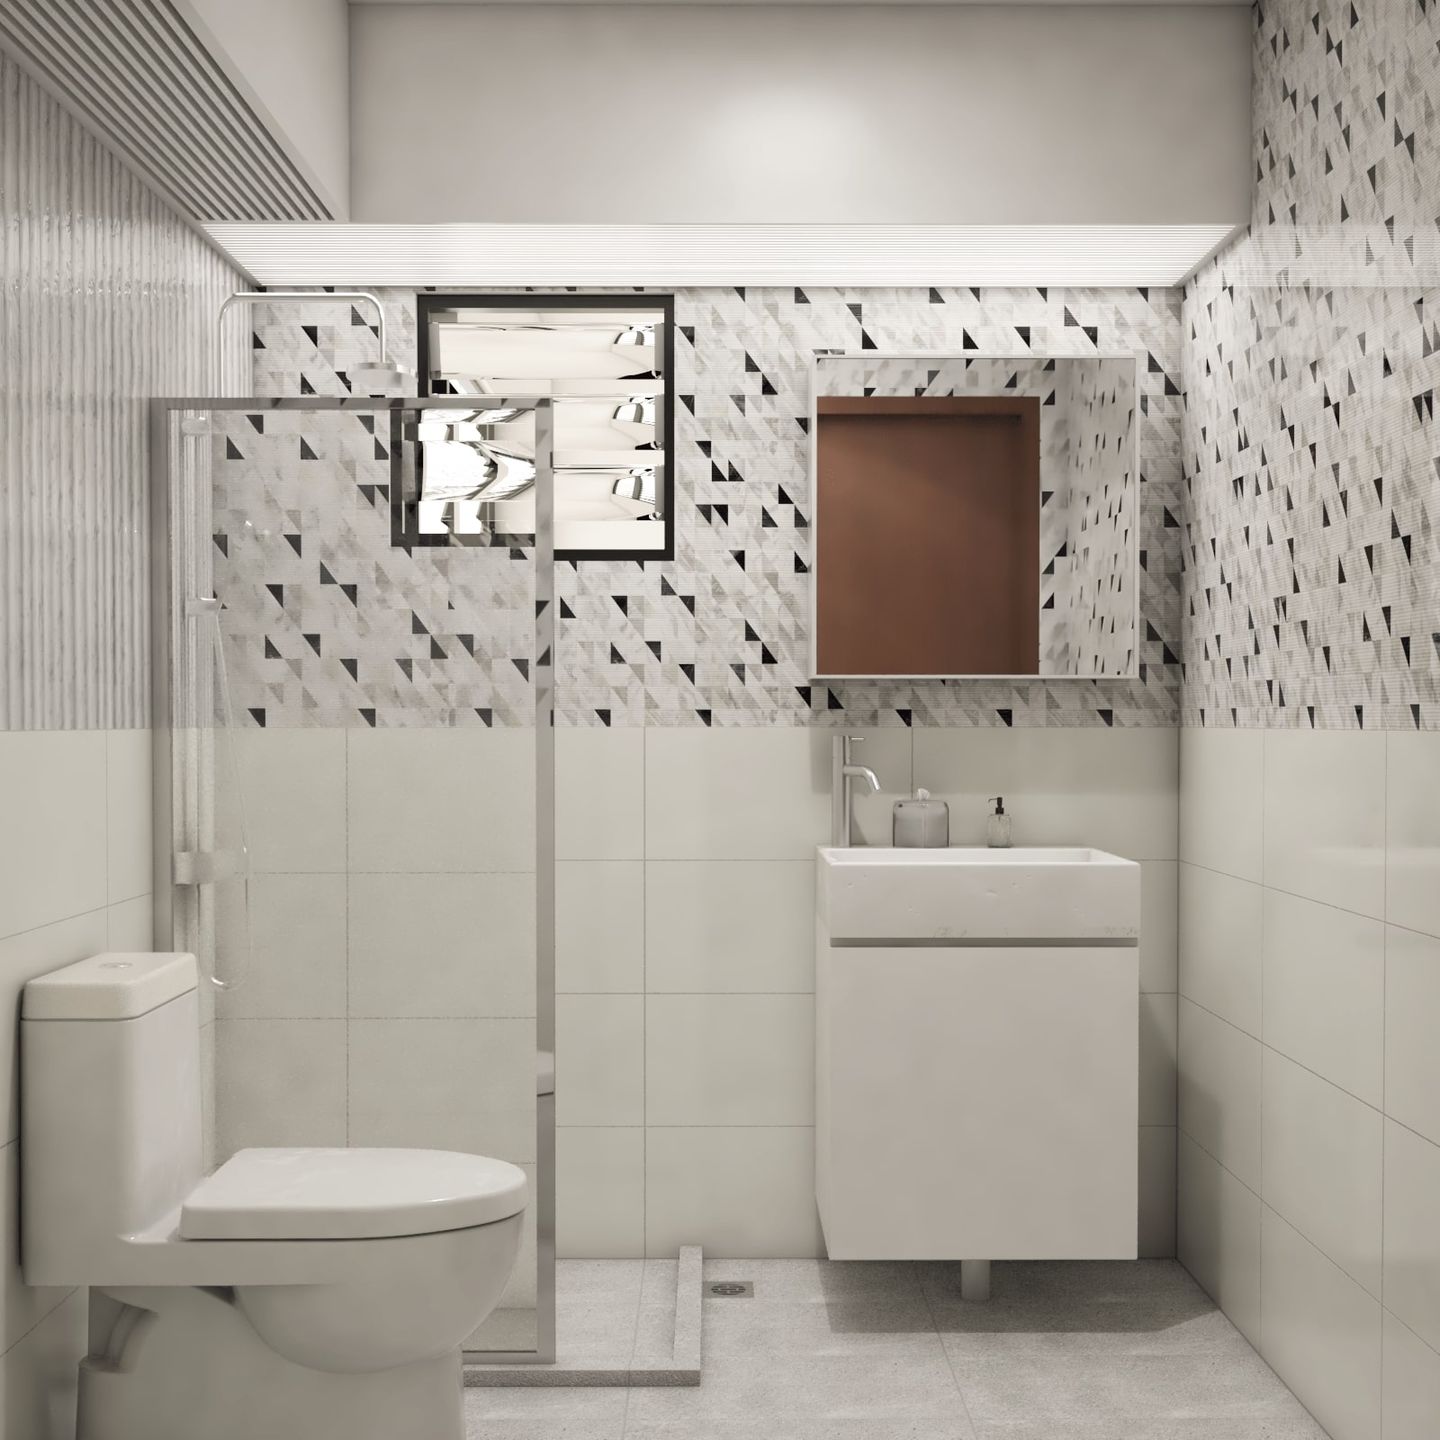 Contemporary Bathroom Design With Printed Wall Tiles - Livspace